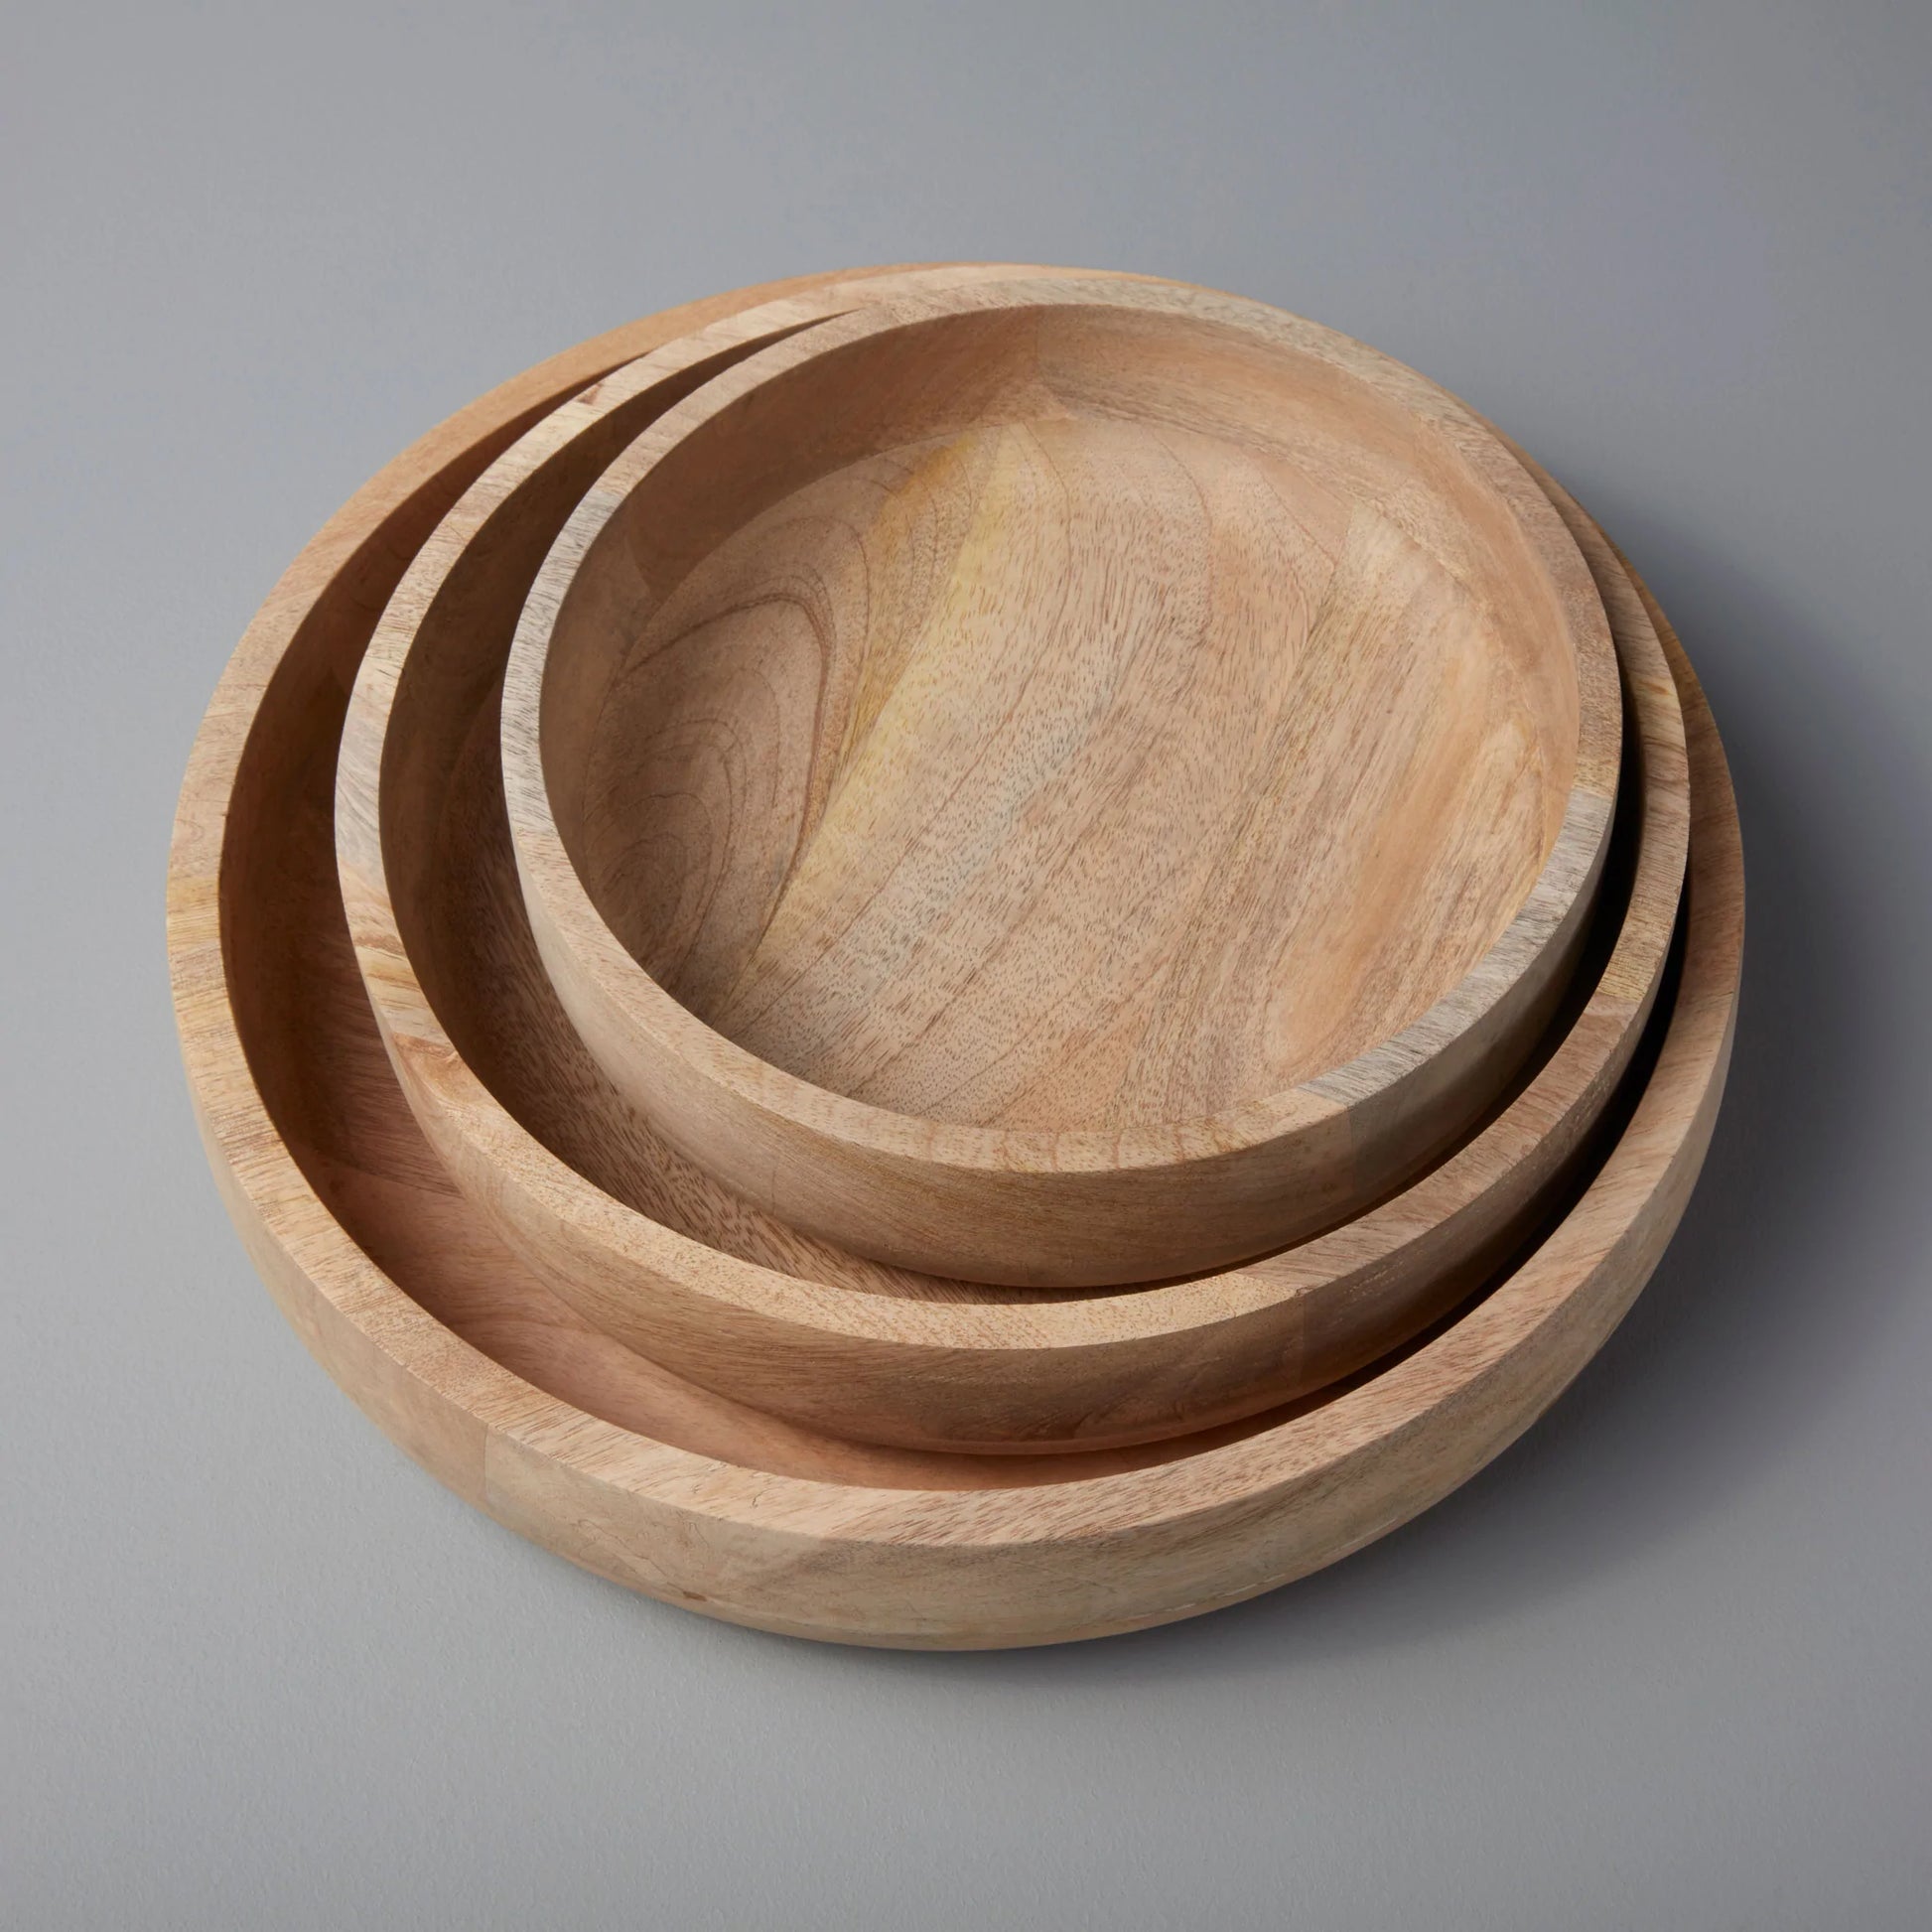 Nora Nesting Bowls: Set of Nora nesting bowls from Grace Blu Shoppe, perfect for versatile storage and organization in your home.